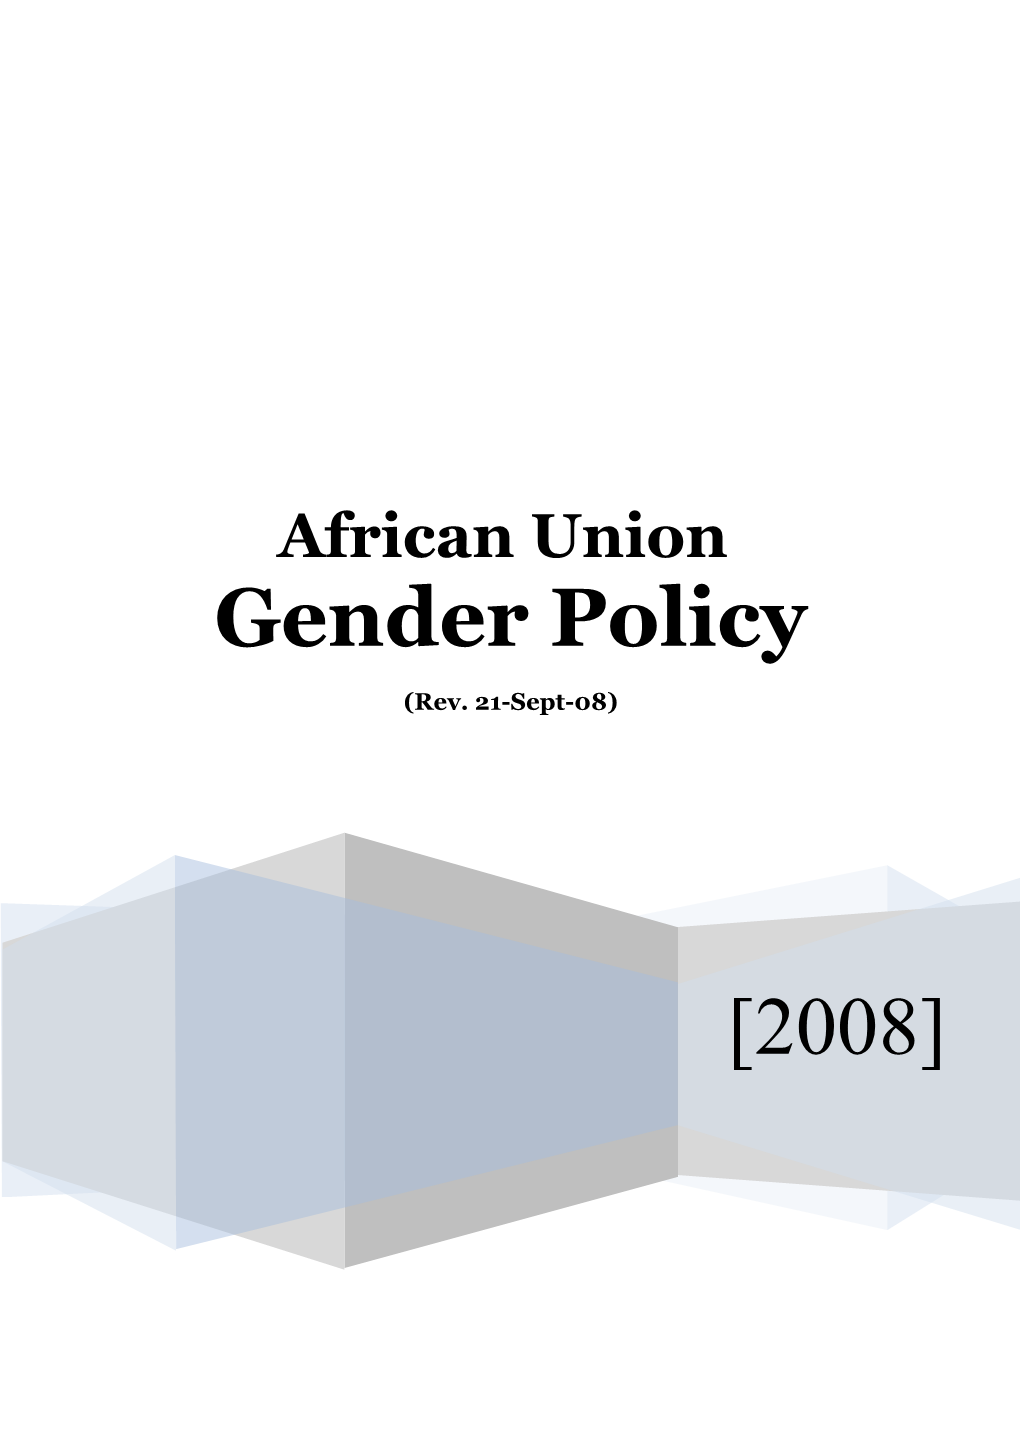 African Union Gender Policy